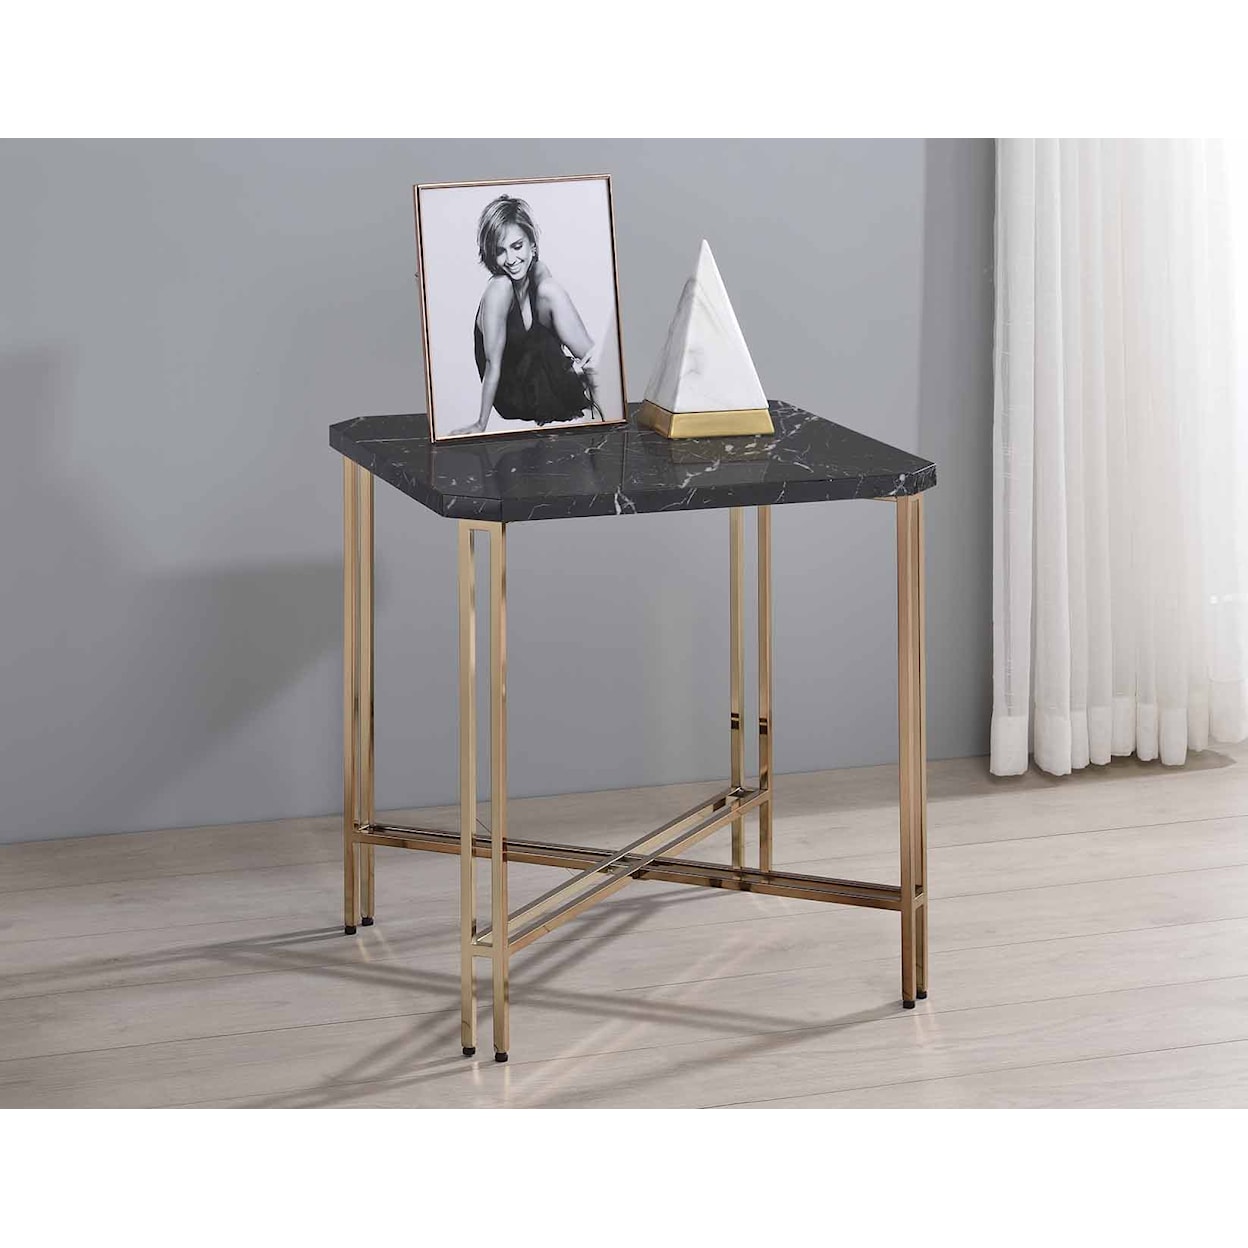 Prime Daxton End Table